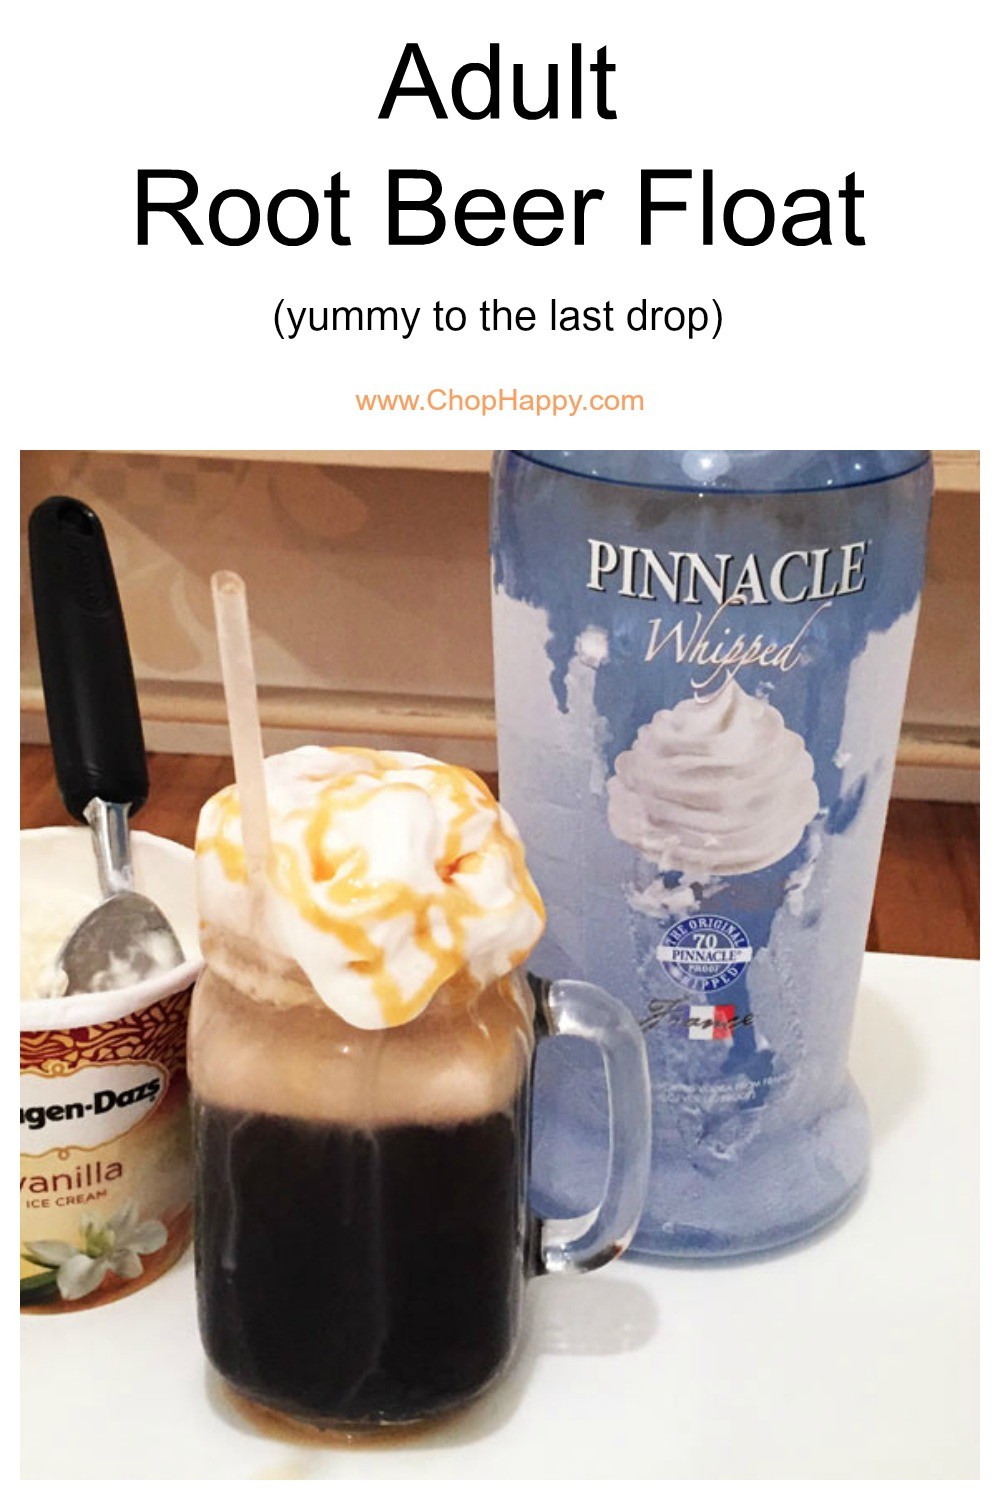 Adult Root Beer Float Recipe. Happy cocktail recipe time. Grab root beer, vanilla ice cream, vodka, and cheers to you. www.ChopHappy.com #rootBeeerFloat #cocktailRecipe